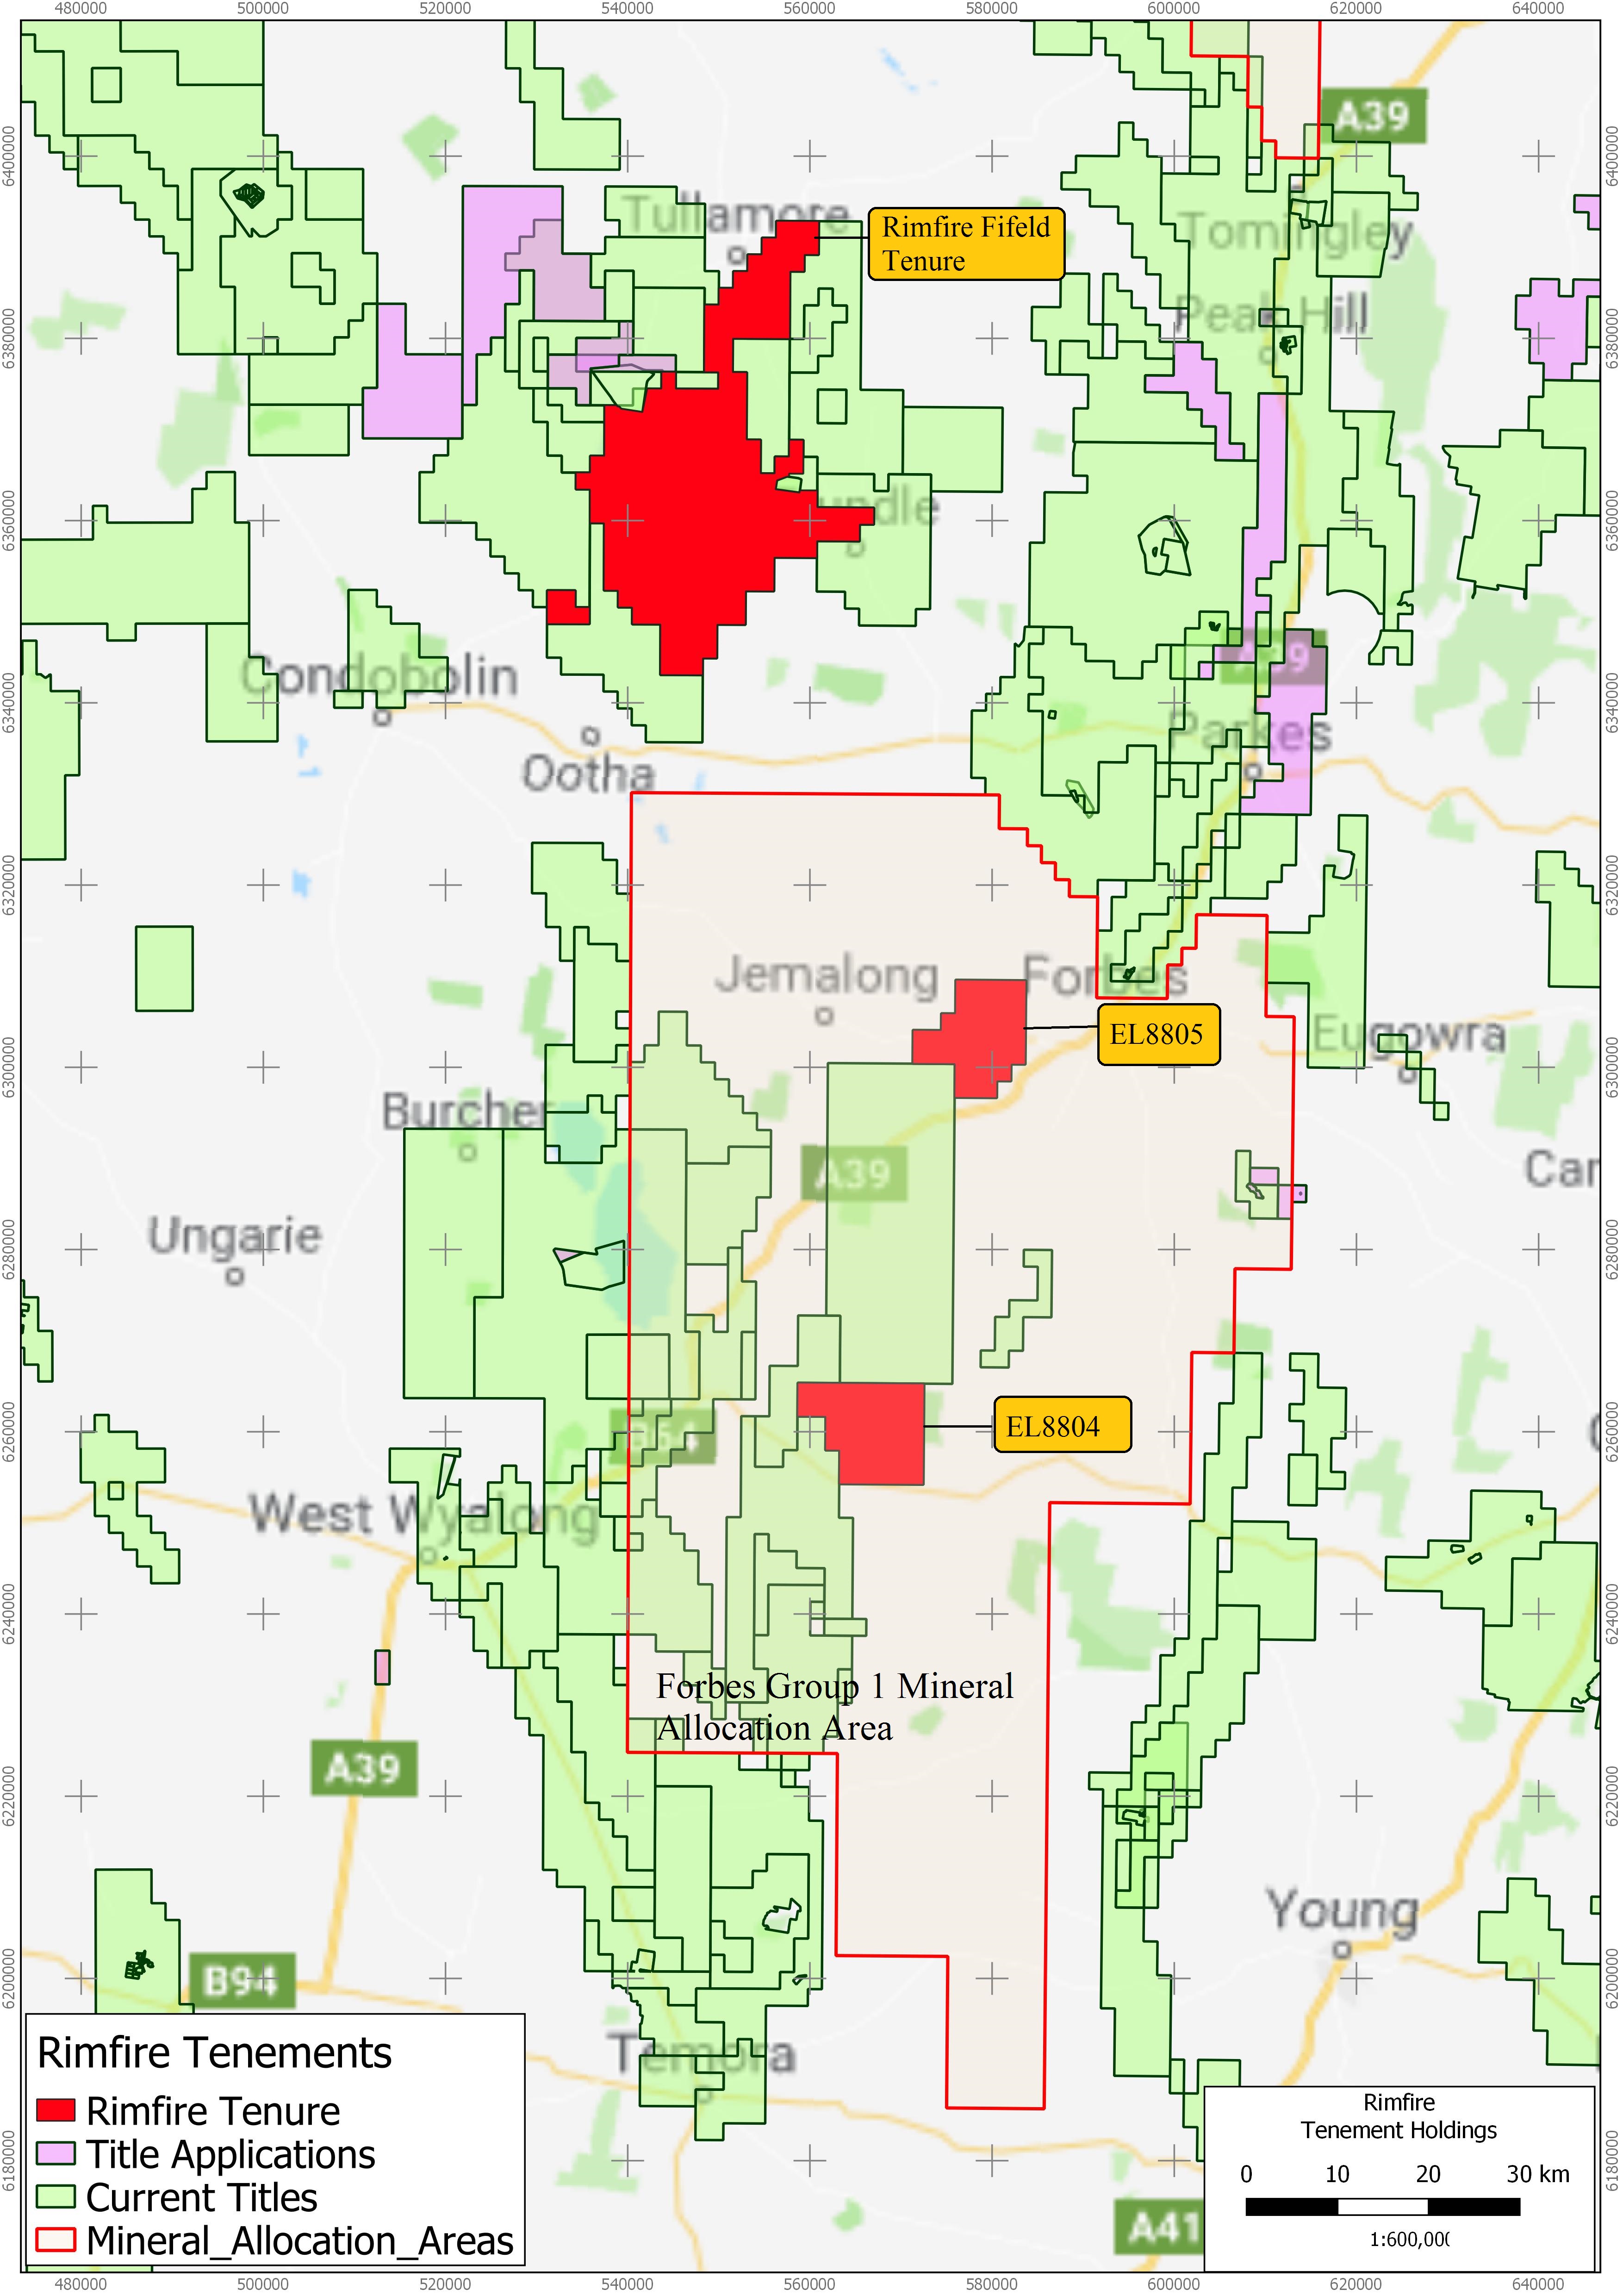 Location Map of Rimfire Exploration Licences in Central NSW